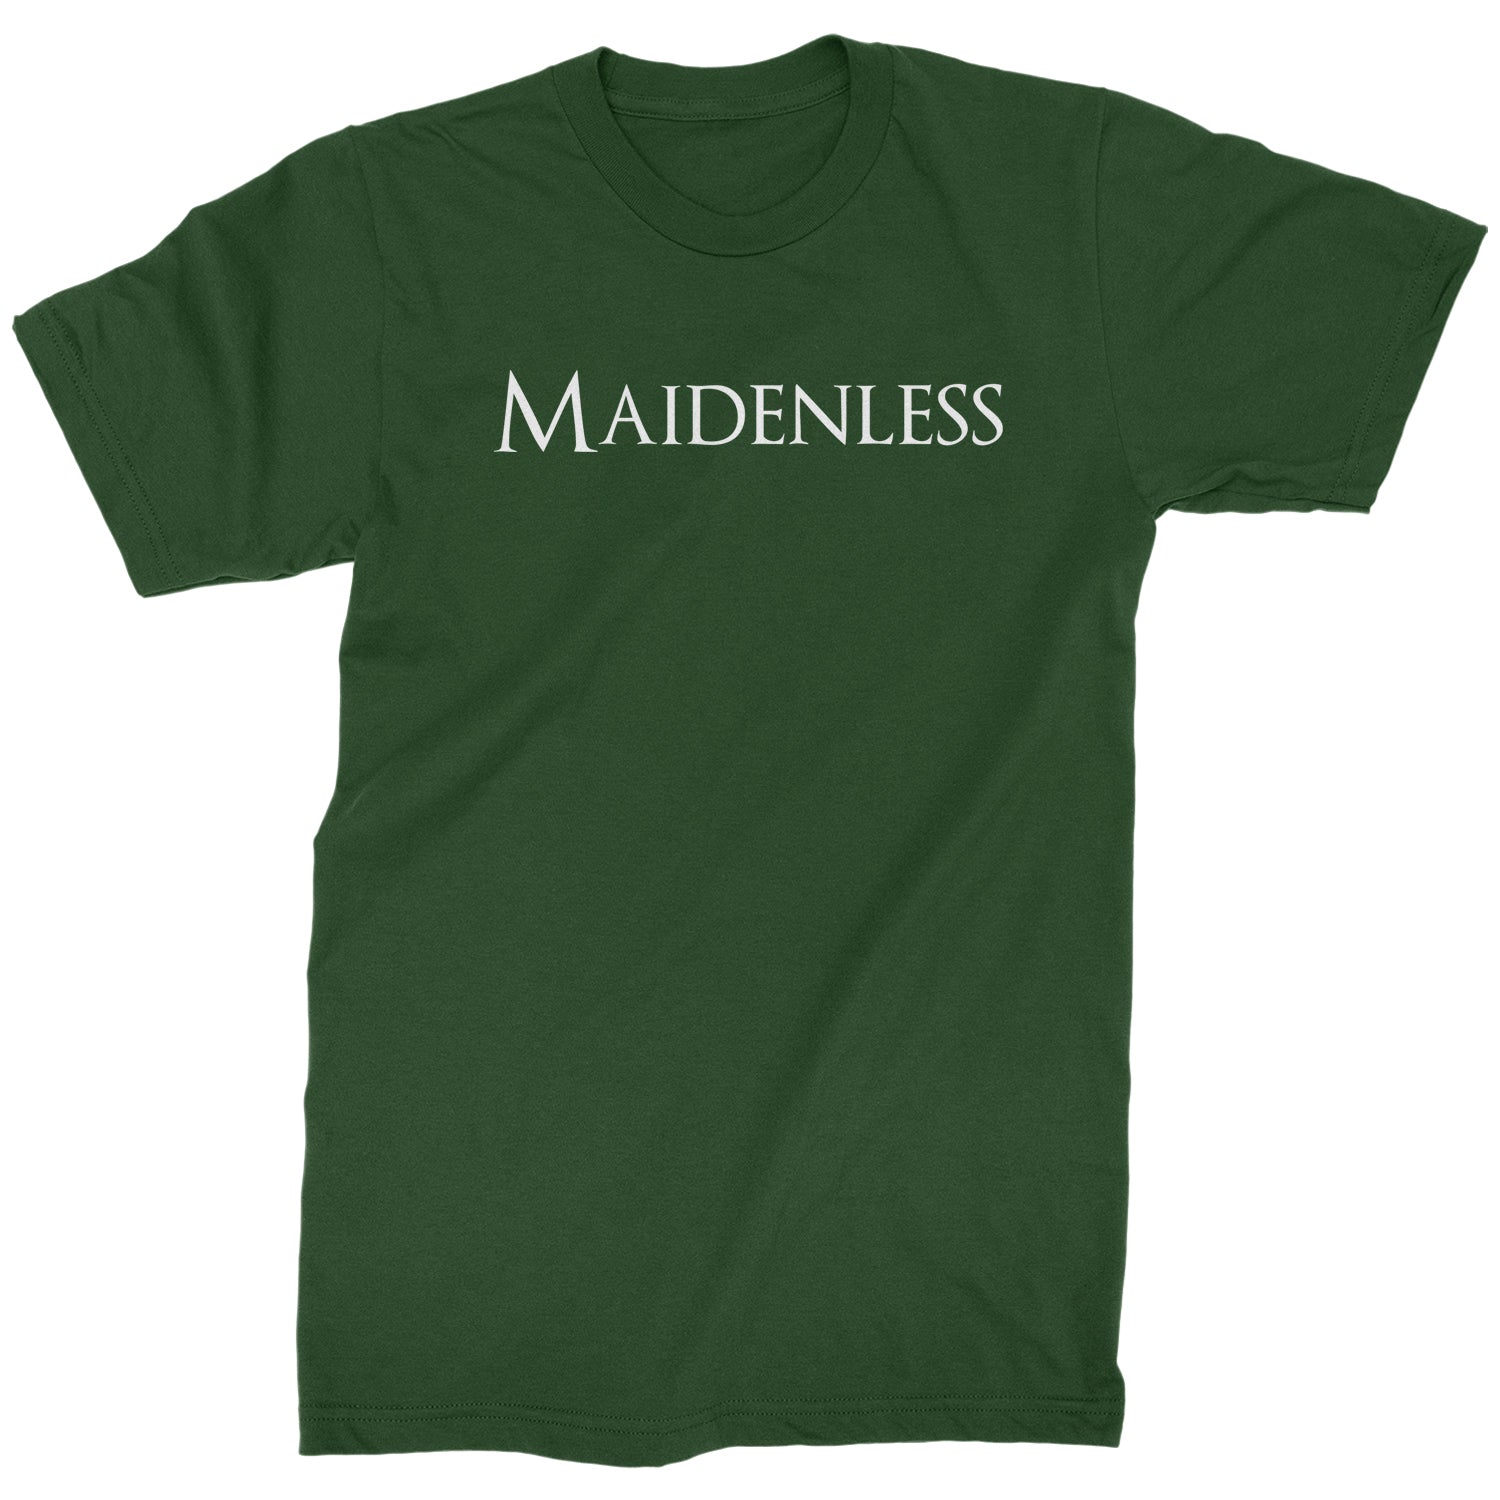 Maidenless Mens T-shirt elden, game, video by Expression Tees